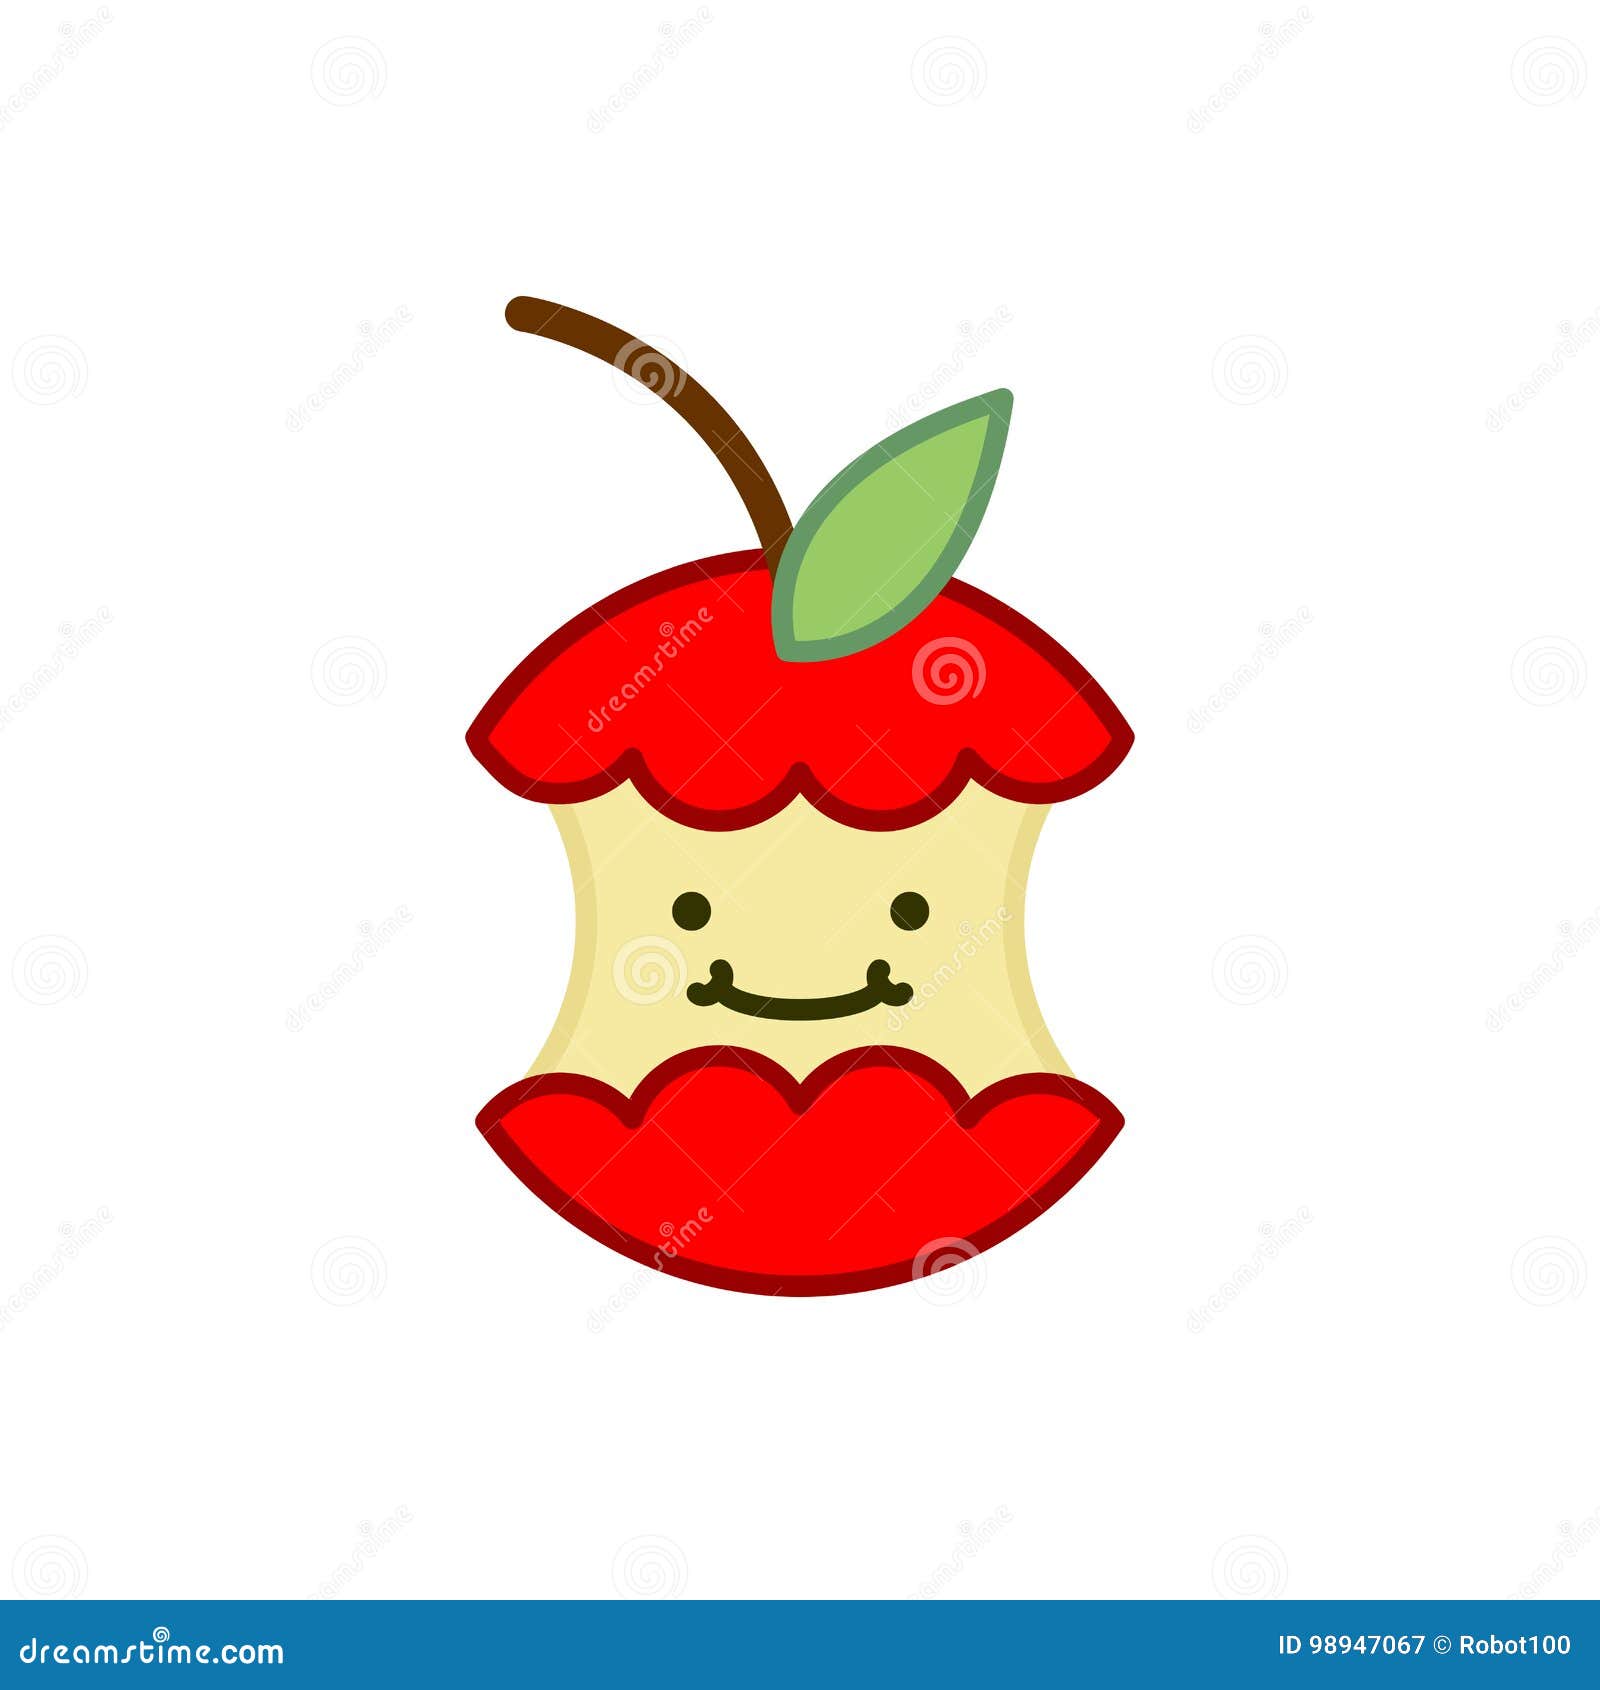 Pin on Adorable Apple